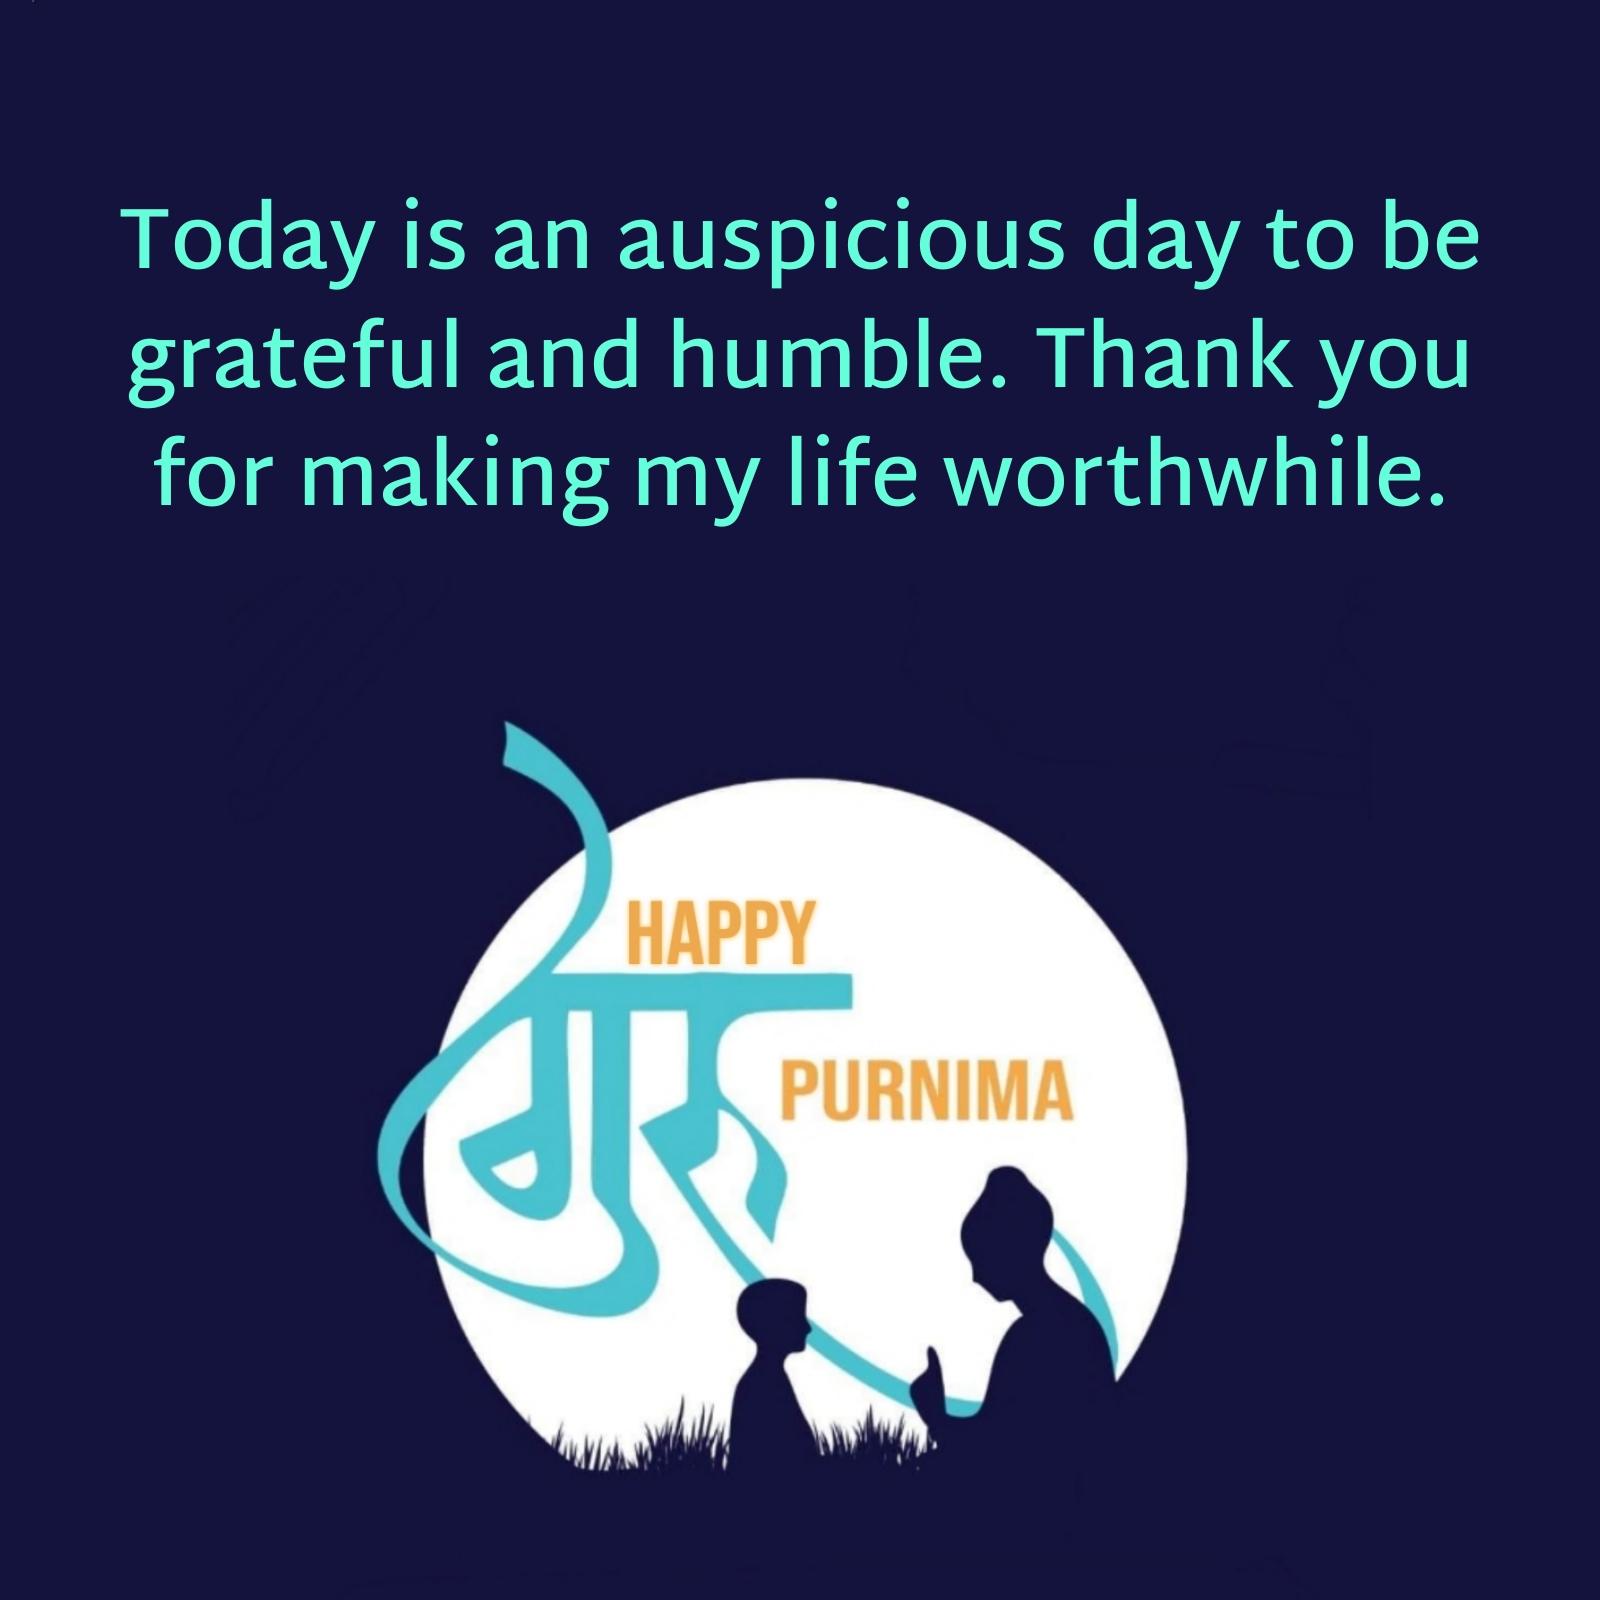 Today is an auspicious day to be grateful and humble